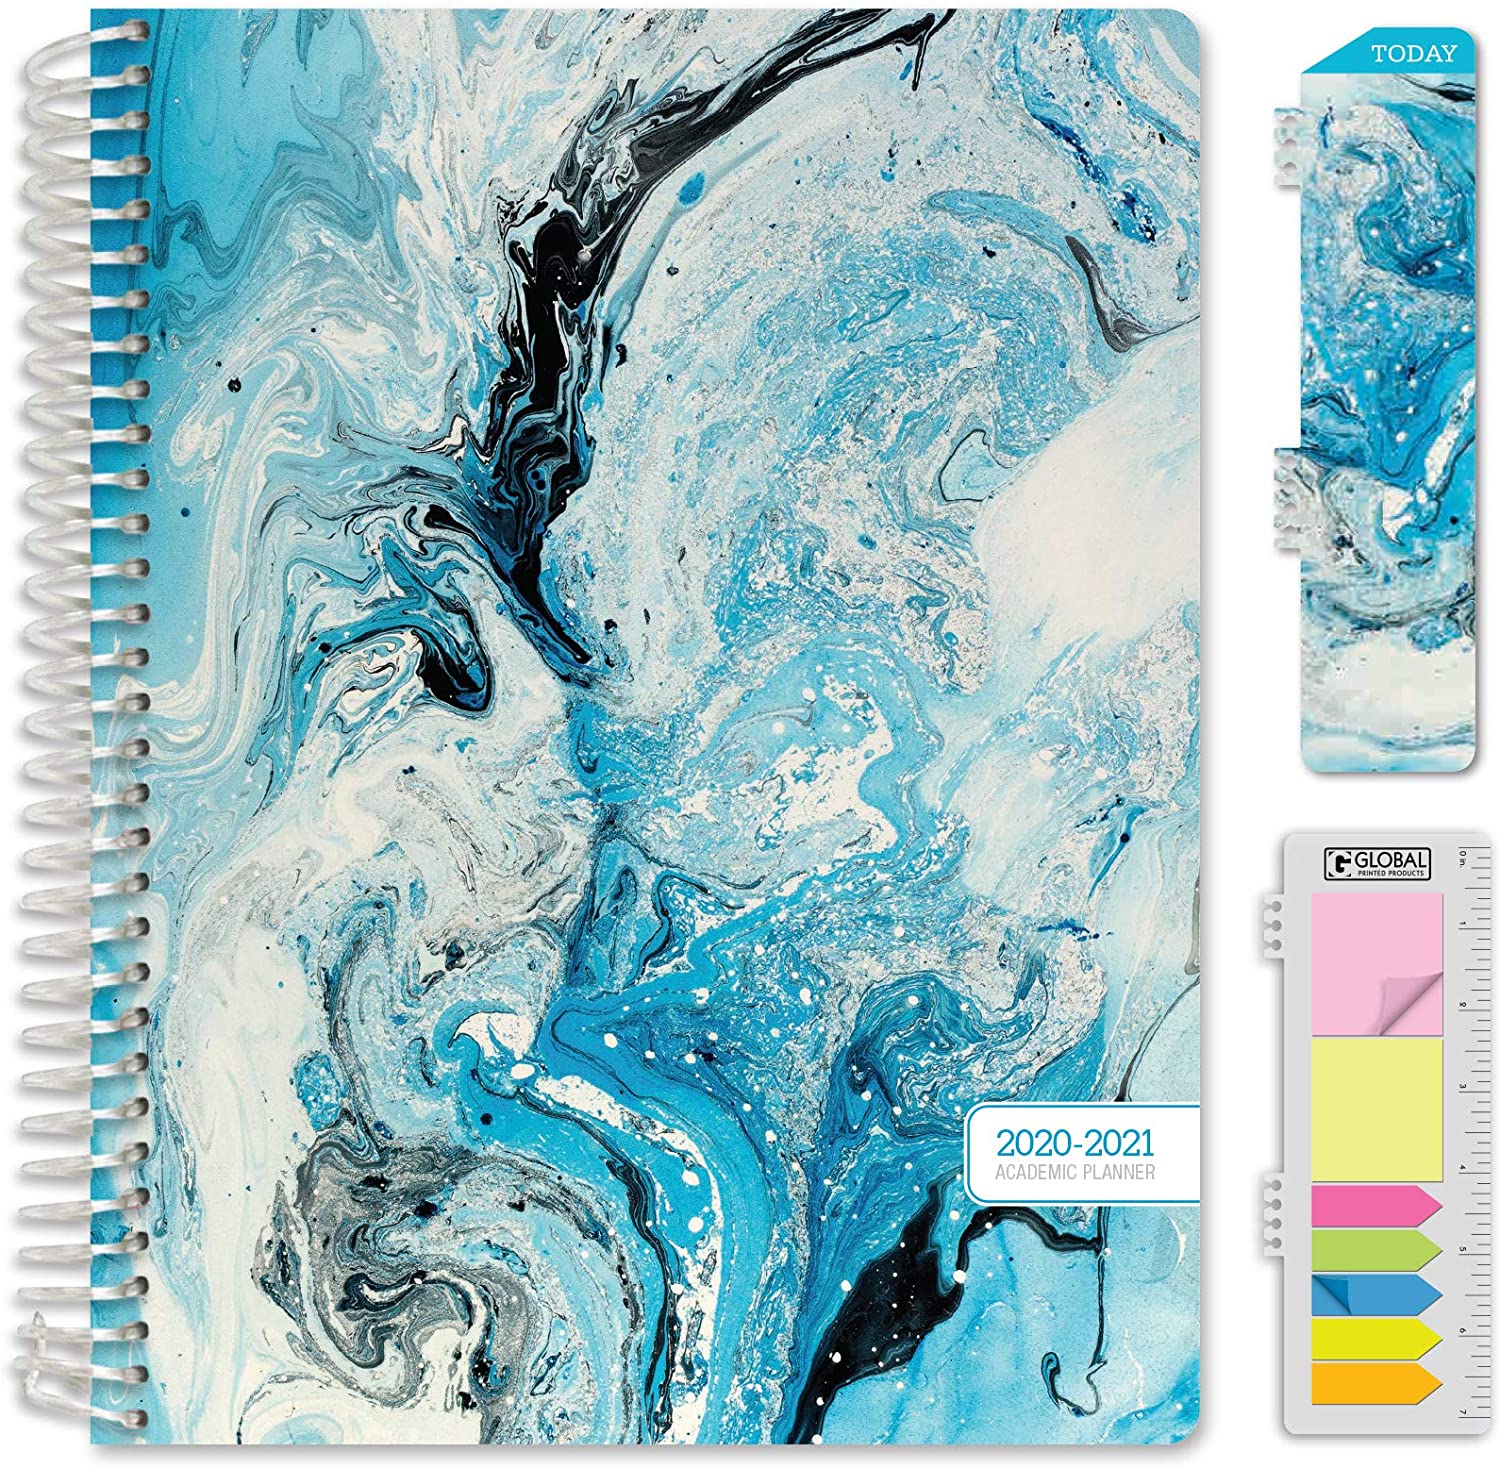 HARDCOVER Academic Year 2020-2021 Planner: (June 2020 Through July 2021) 8.5"x11" Daily Weekly Monthly Planner Yearly Agenda. Bookmark, Pocket Folder and Sticky Note Set (Blue Marble)